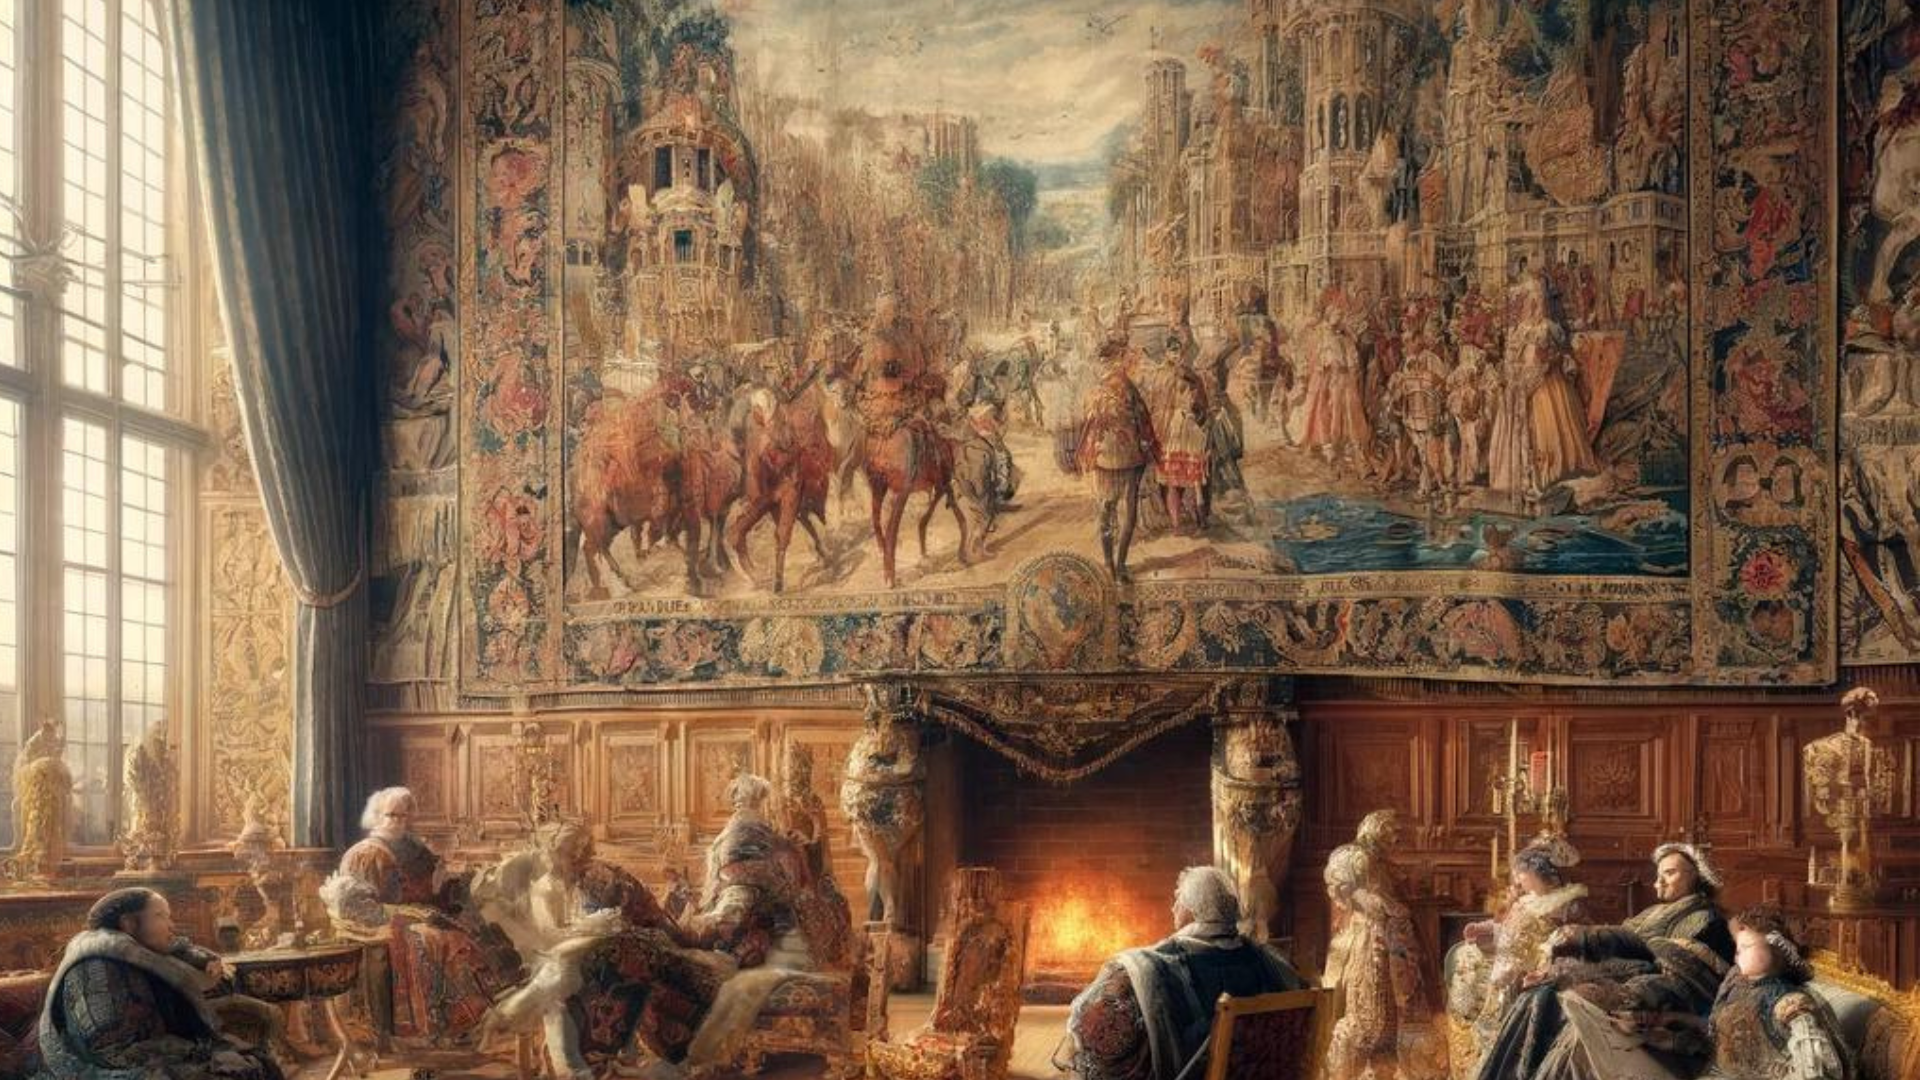 A Renaissance-era royal household interior, with nobles admiring opulent wall tapestries depicting historical battles and mythology, amidst rich furnishings and a grand fireplace, illuminated by natural light from arched windows.